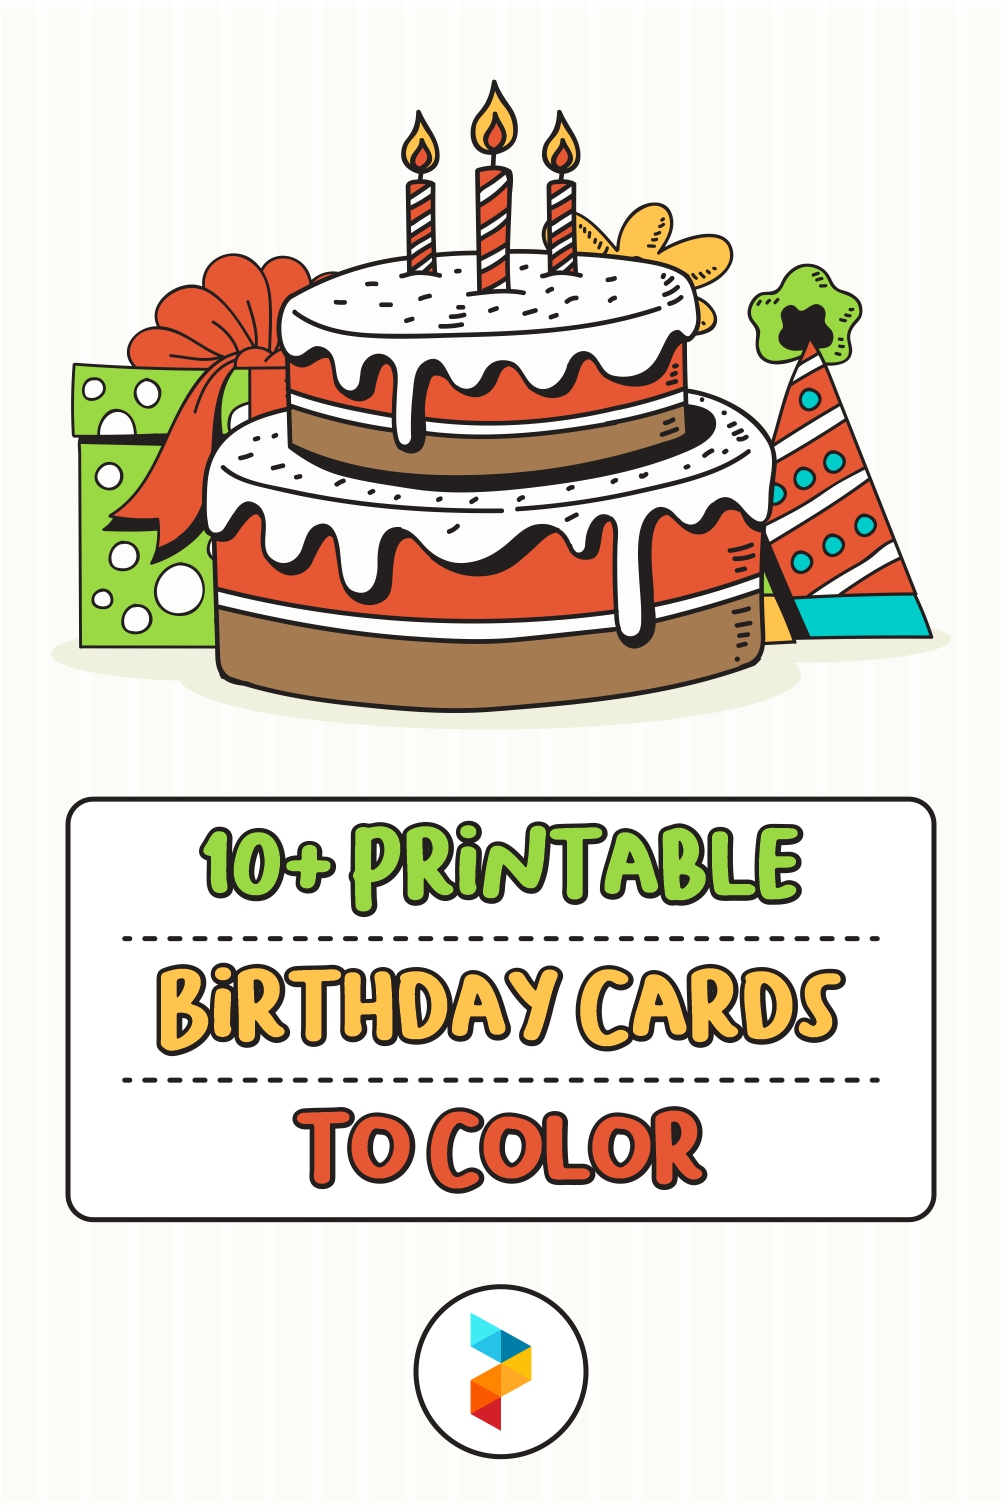 Printable Birthday Cards To Color